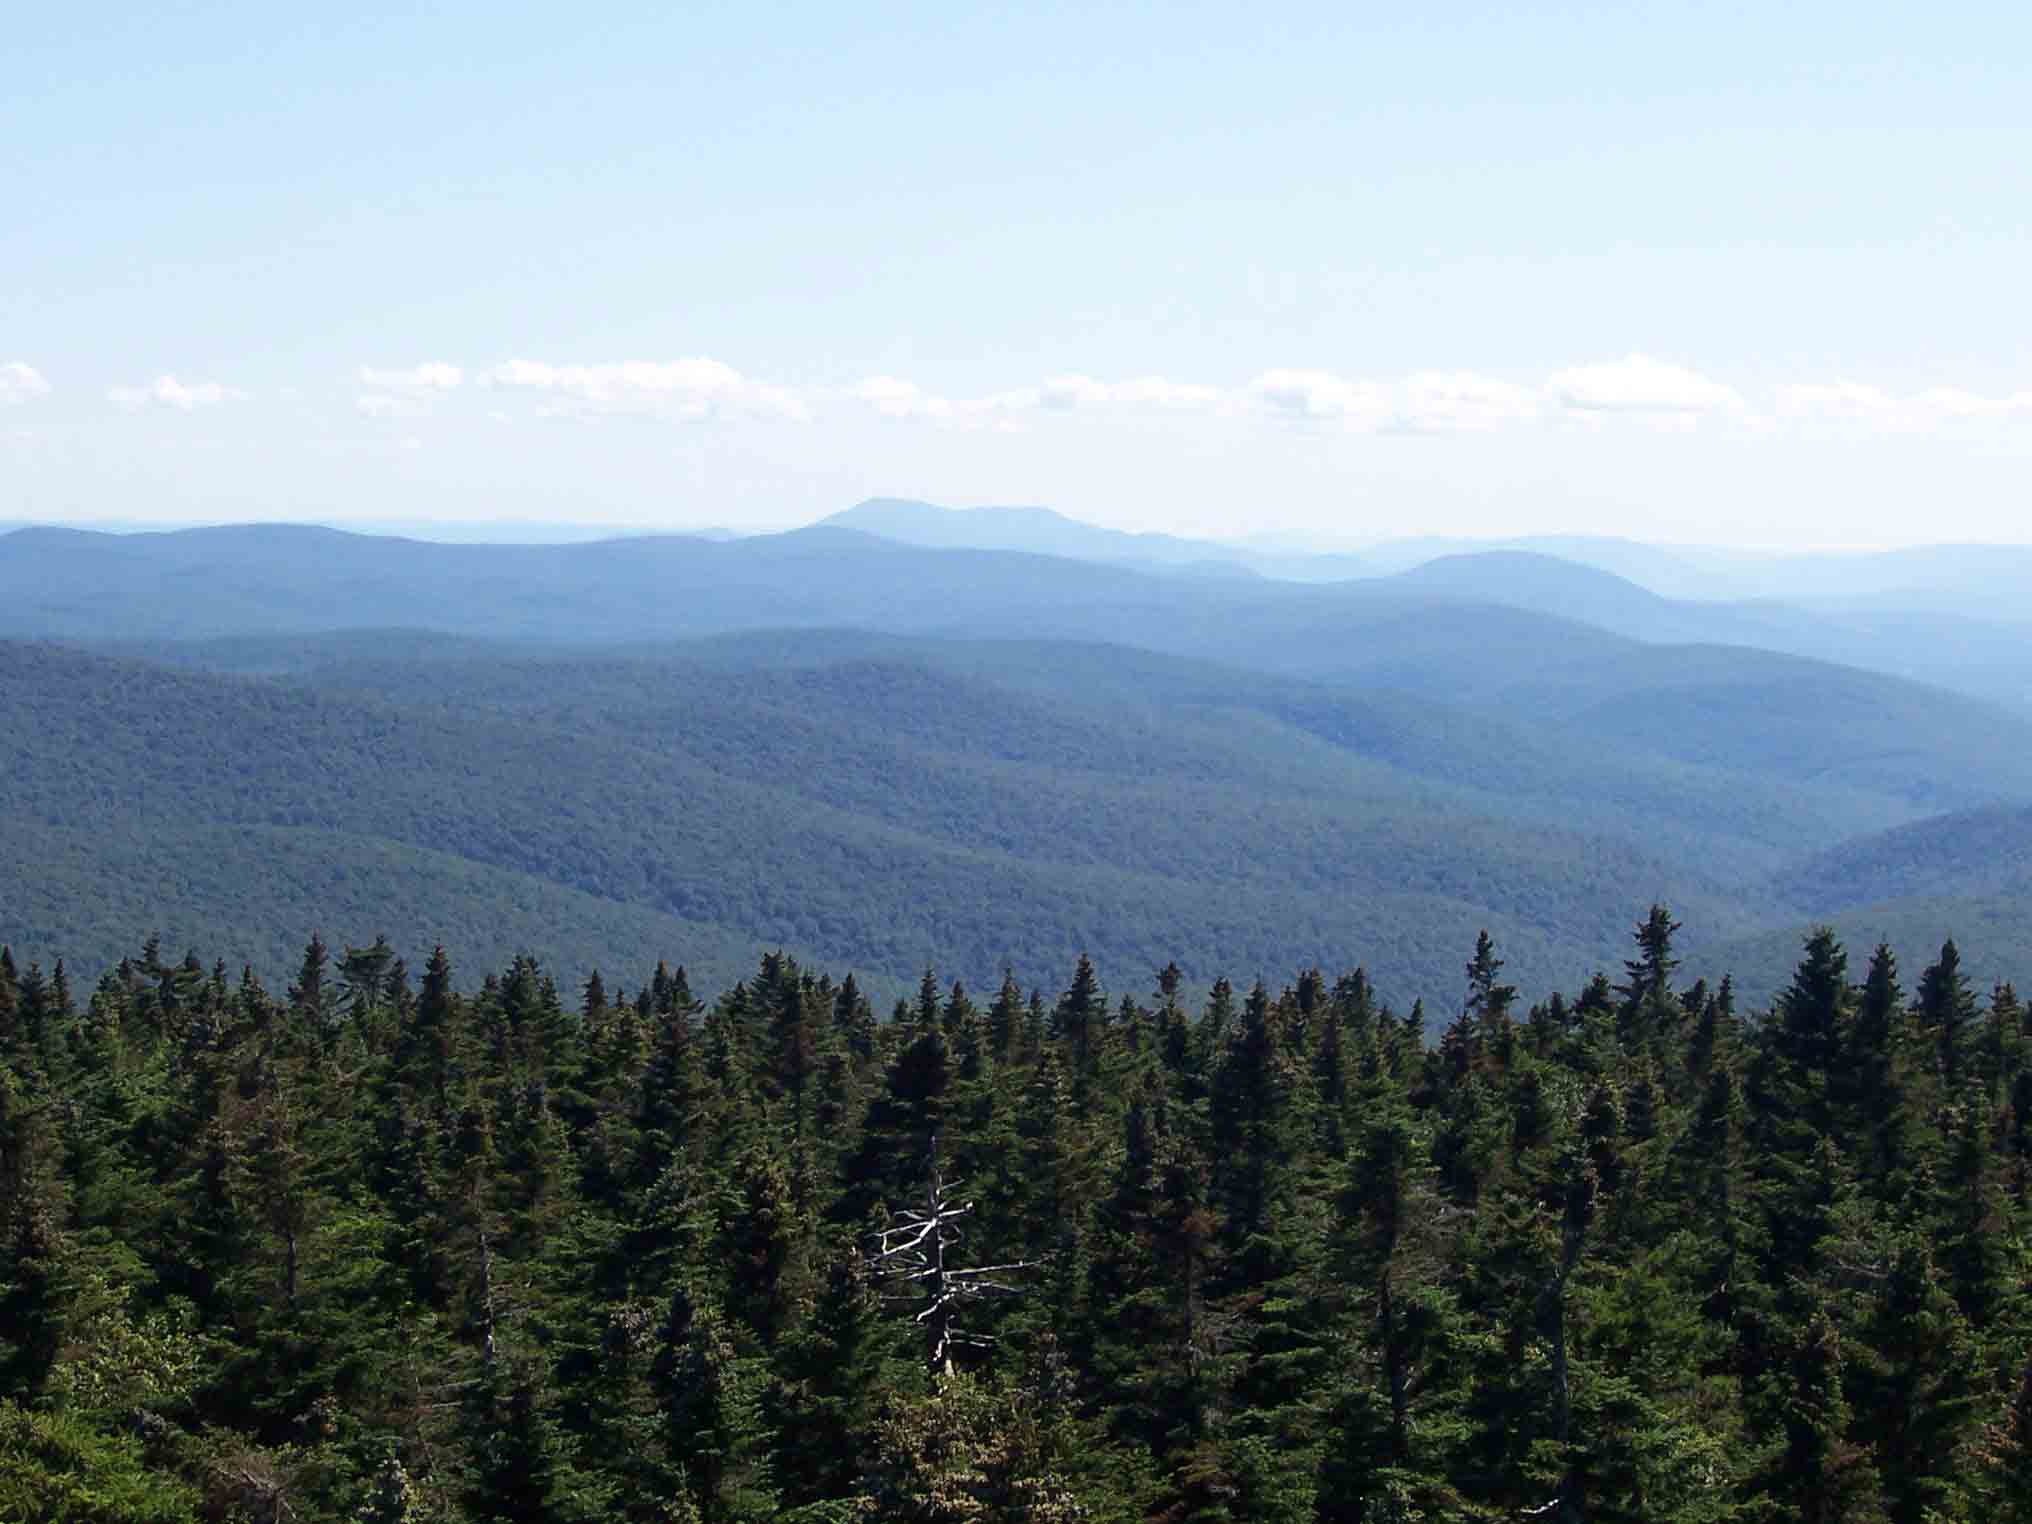 mm 12.2 - View south from firetower on Glastenbury Mt. The large moutain in the distance is Mt. Greylock, highest point in Massachusetts.  Courtesy dlcul@conncoll.edu